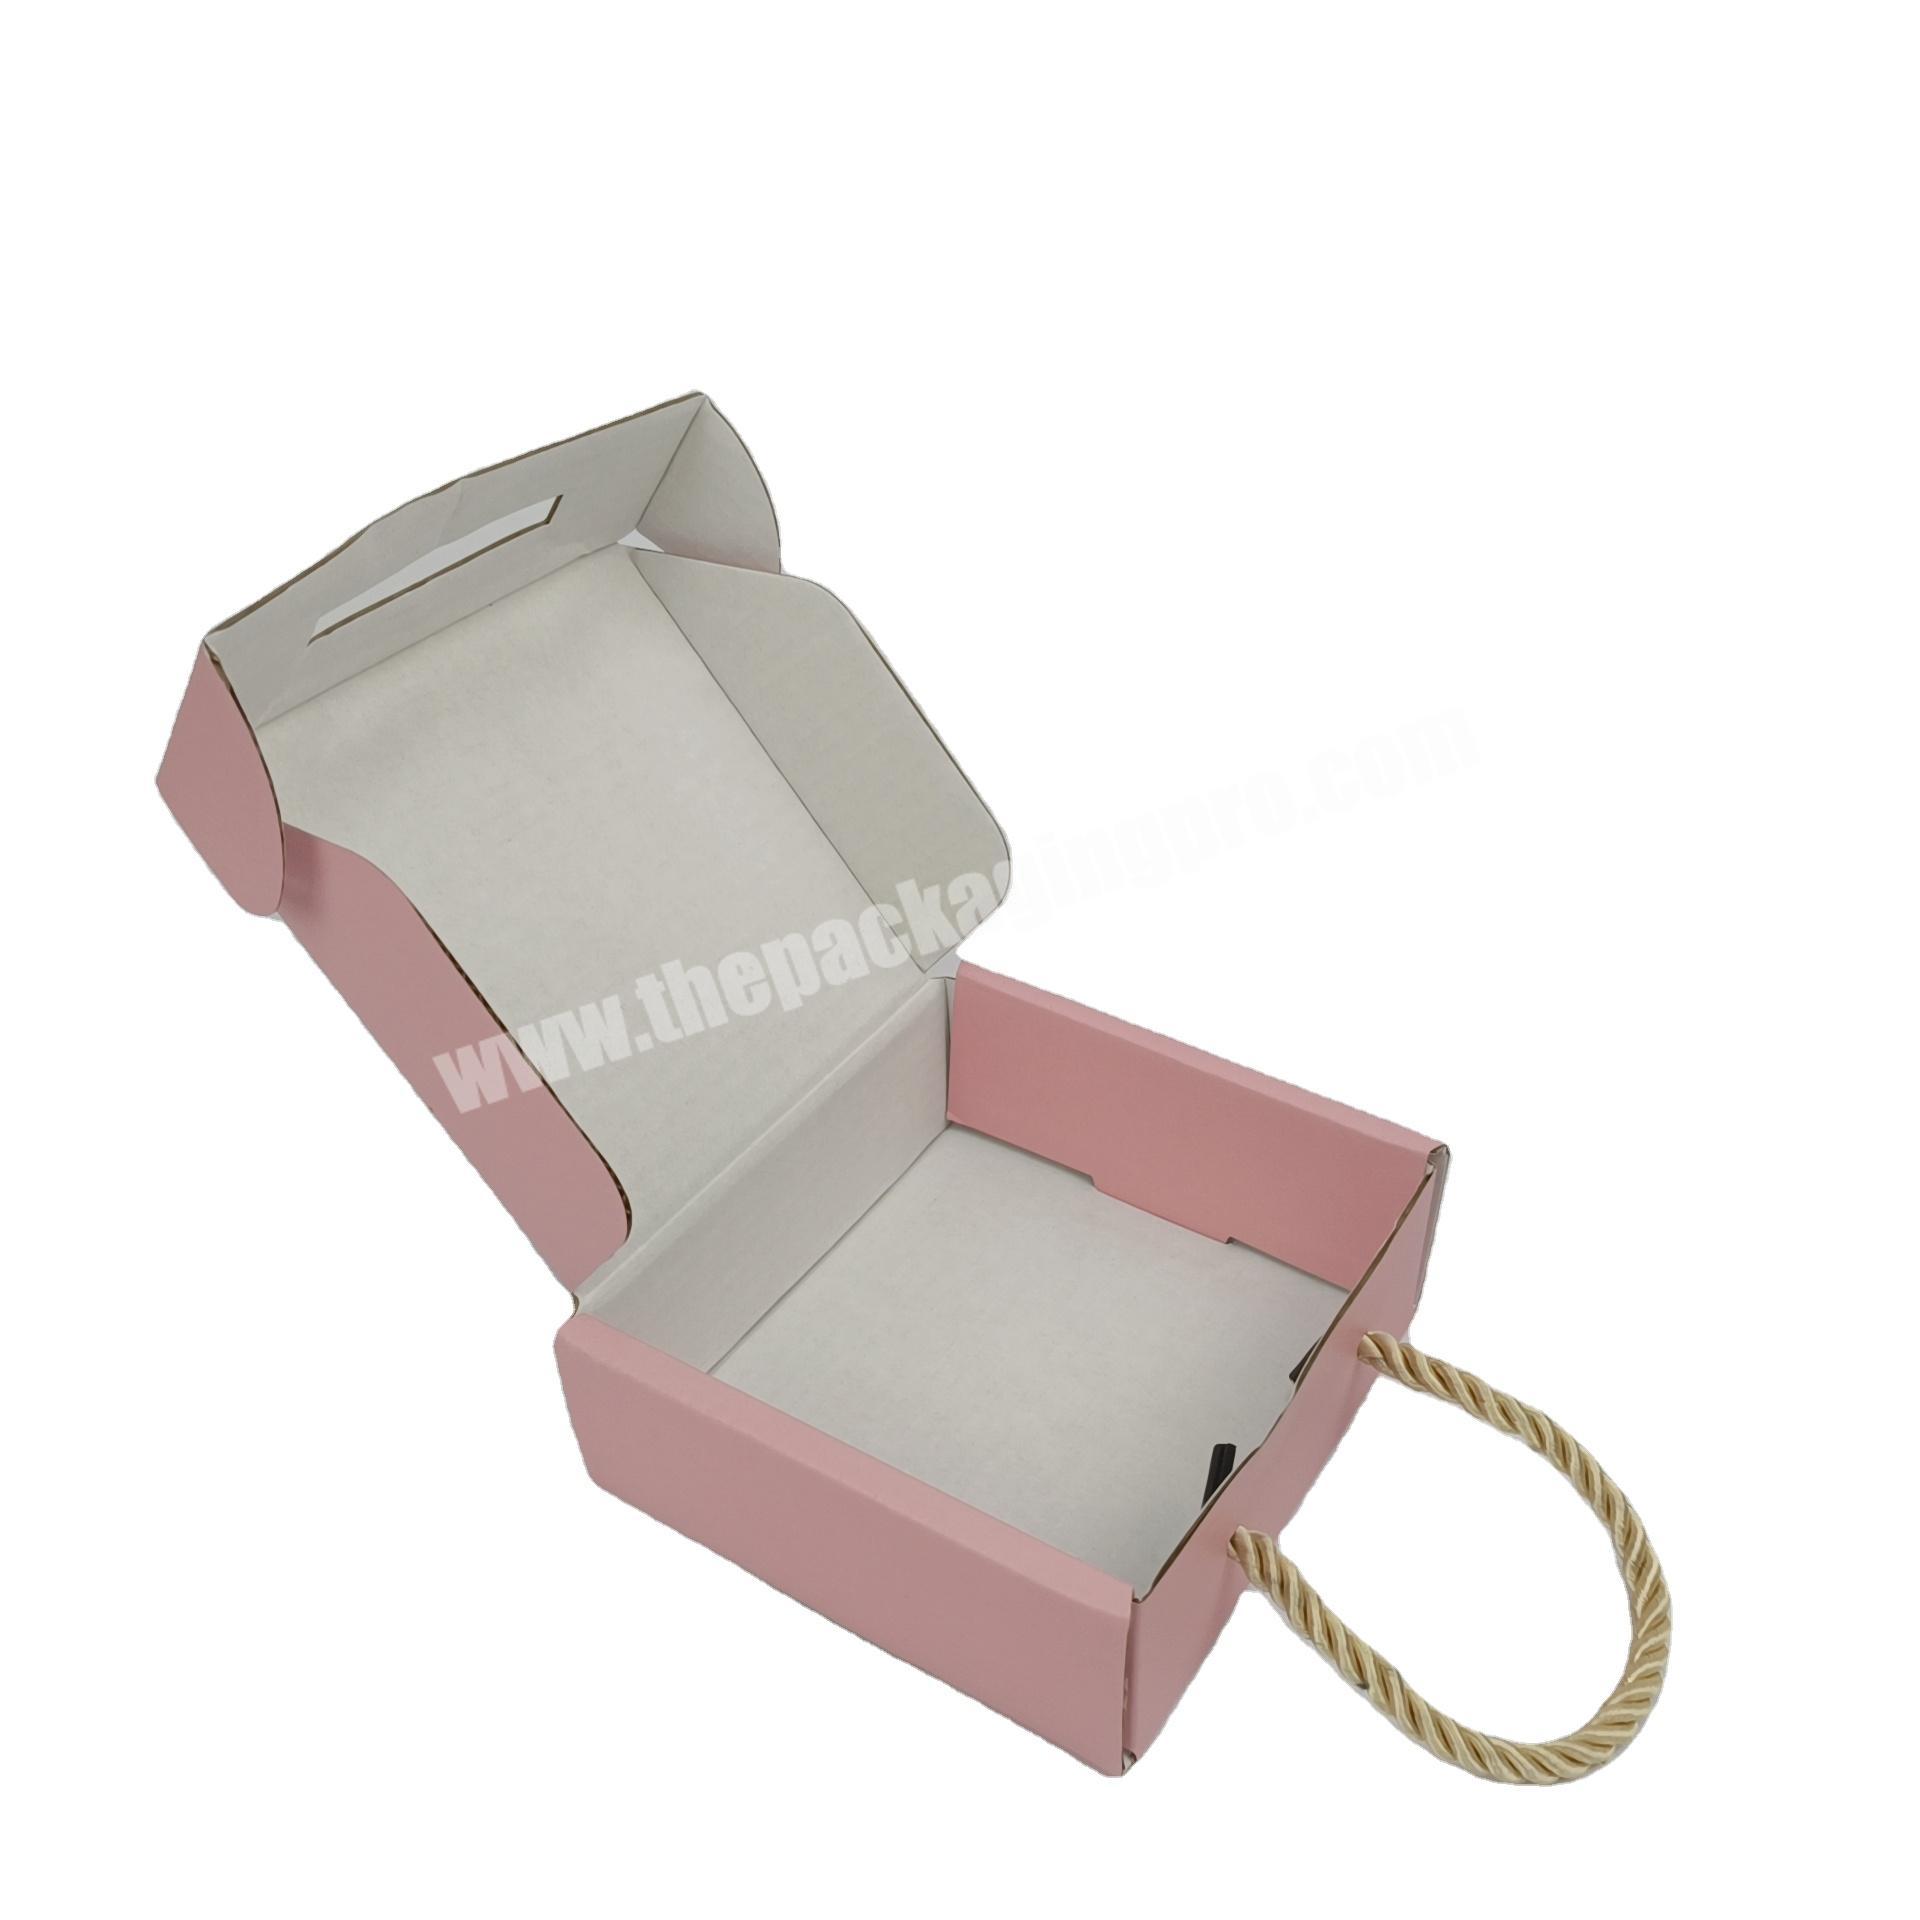 Corrugated E-flute custom  shipping boxes mailer packaging boxes for Clothing Shoes Dress Apparel Lingerie mailer gift carton